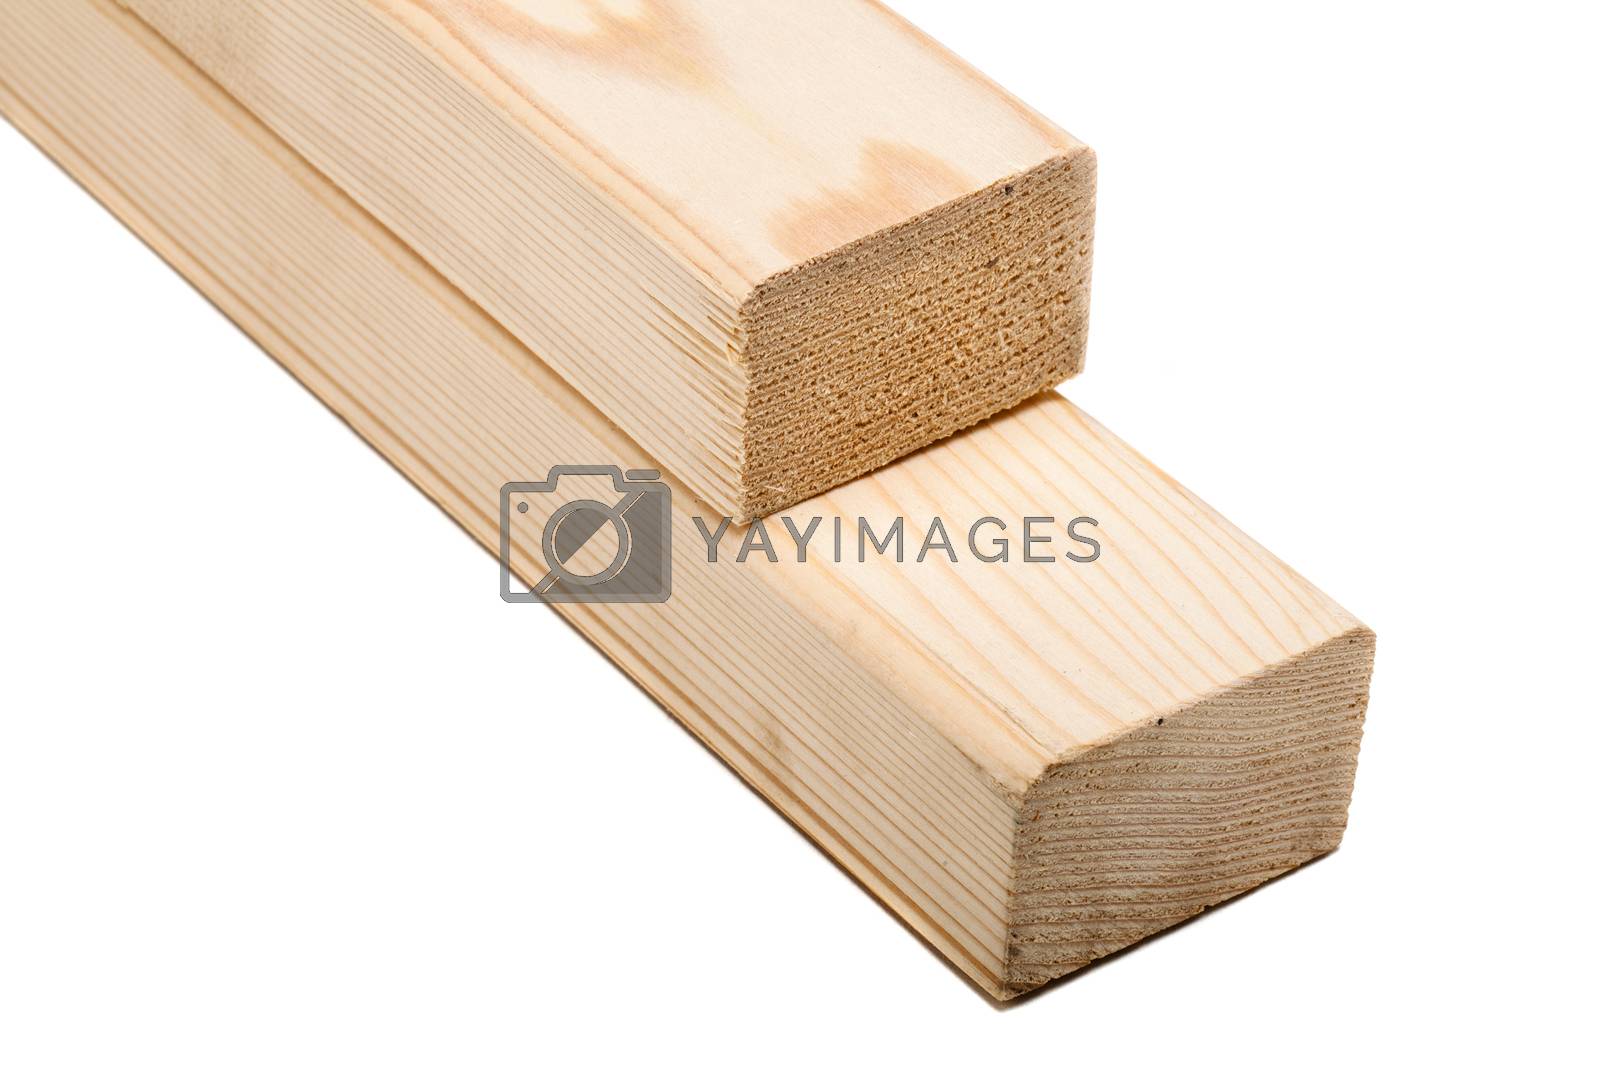 Royalty free image of two wooden beams by kokimk